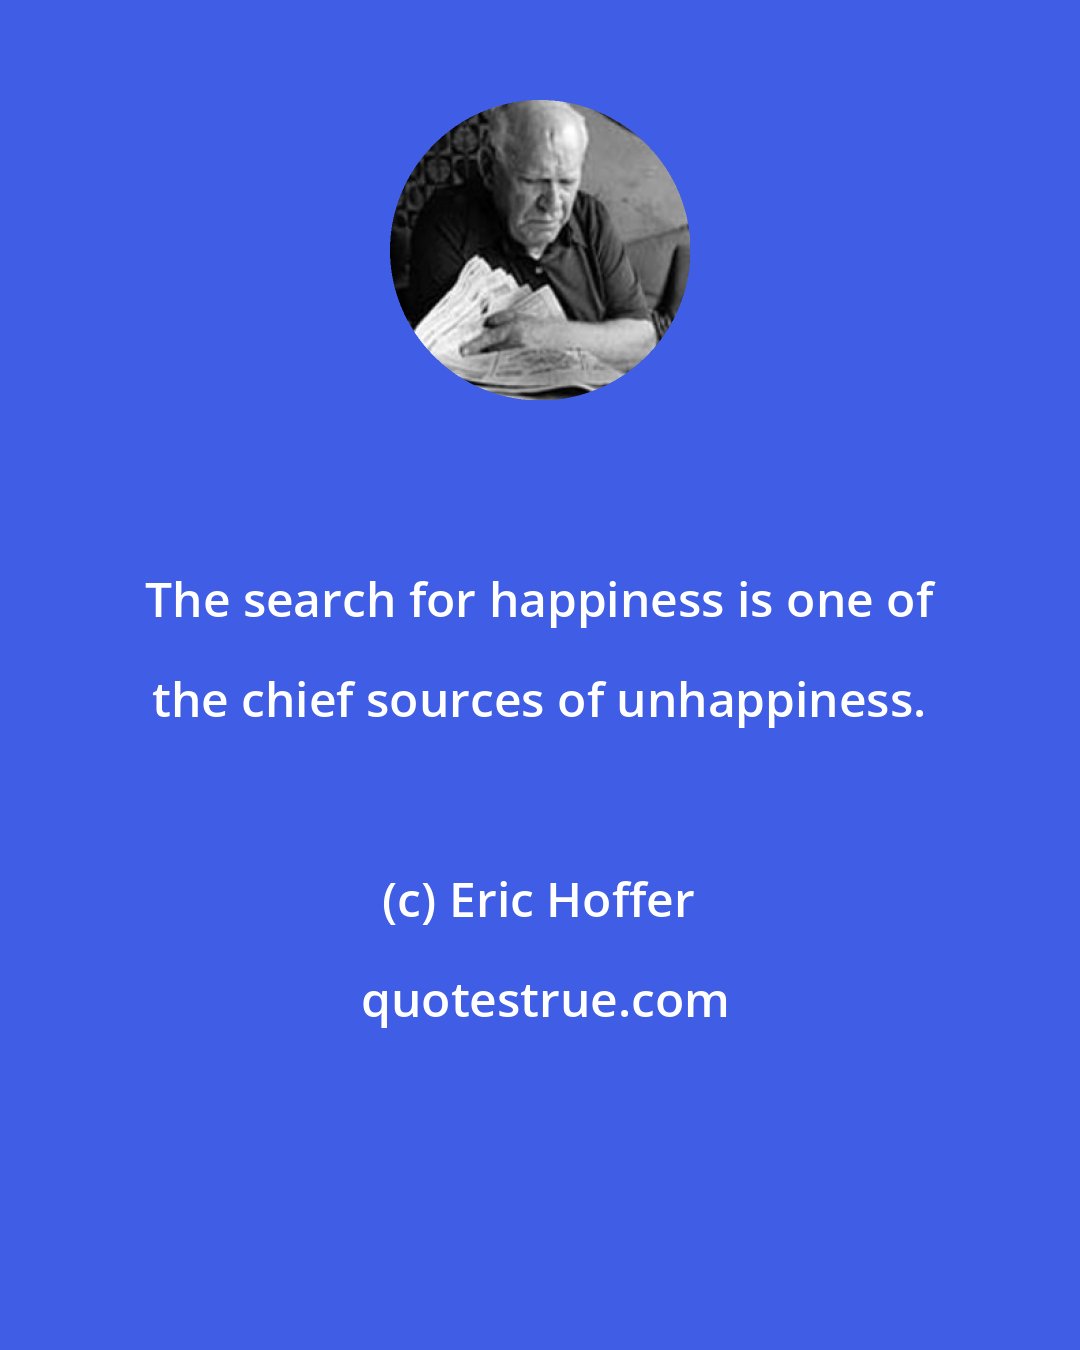 Eric Hoffer: The search for happiness is one of the chief sources of unhappiness.